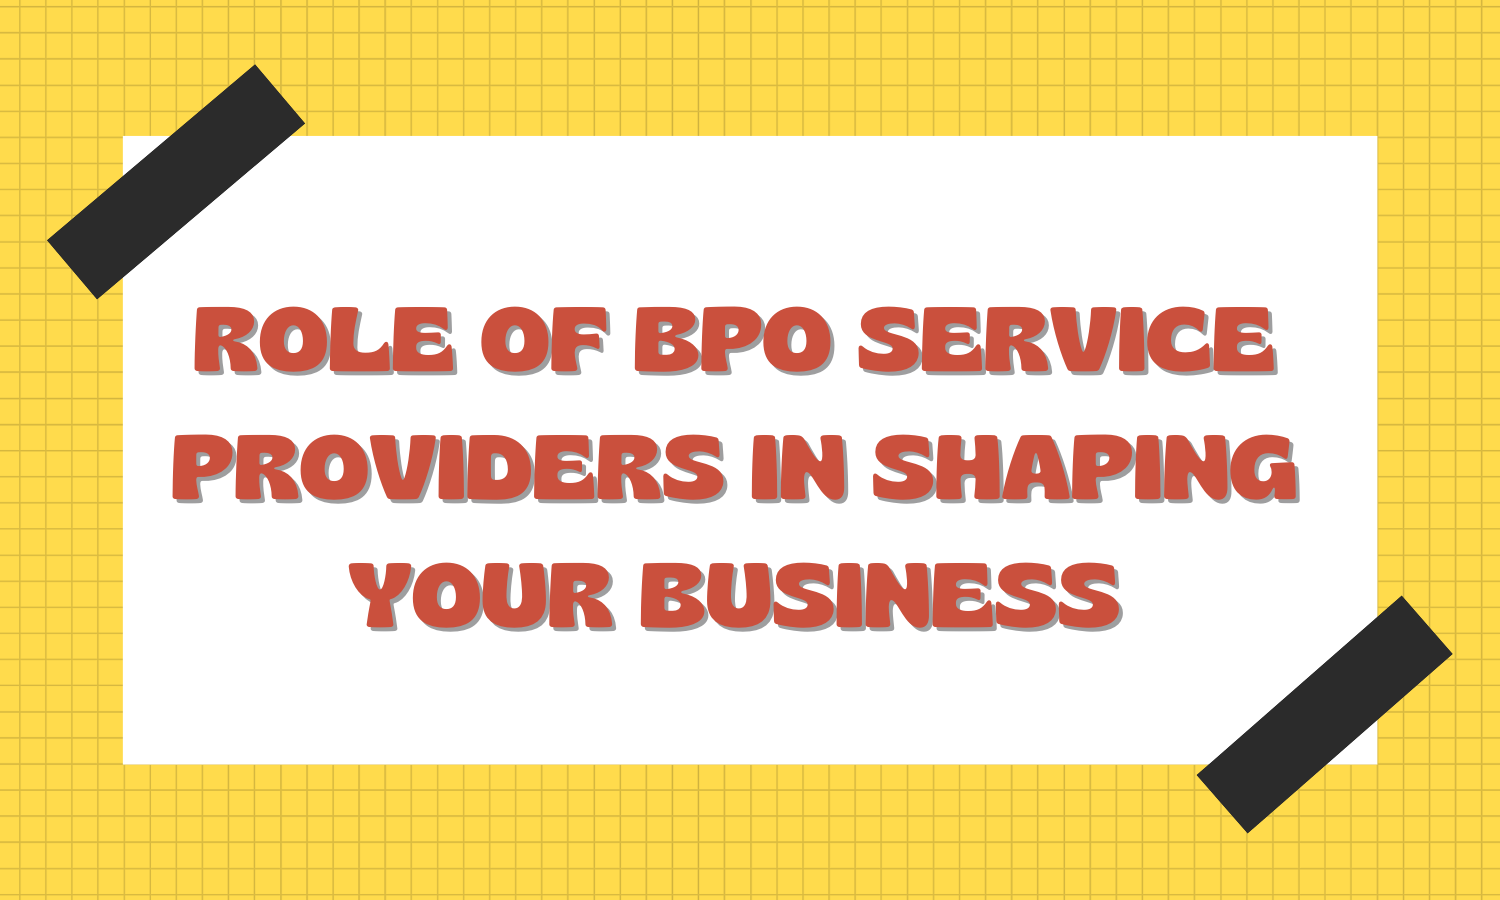 What is the Role of BPO Service Providers in Shaping your Business